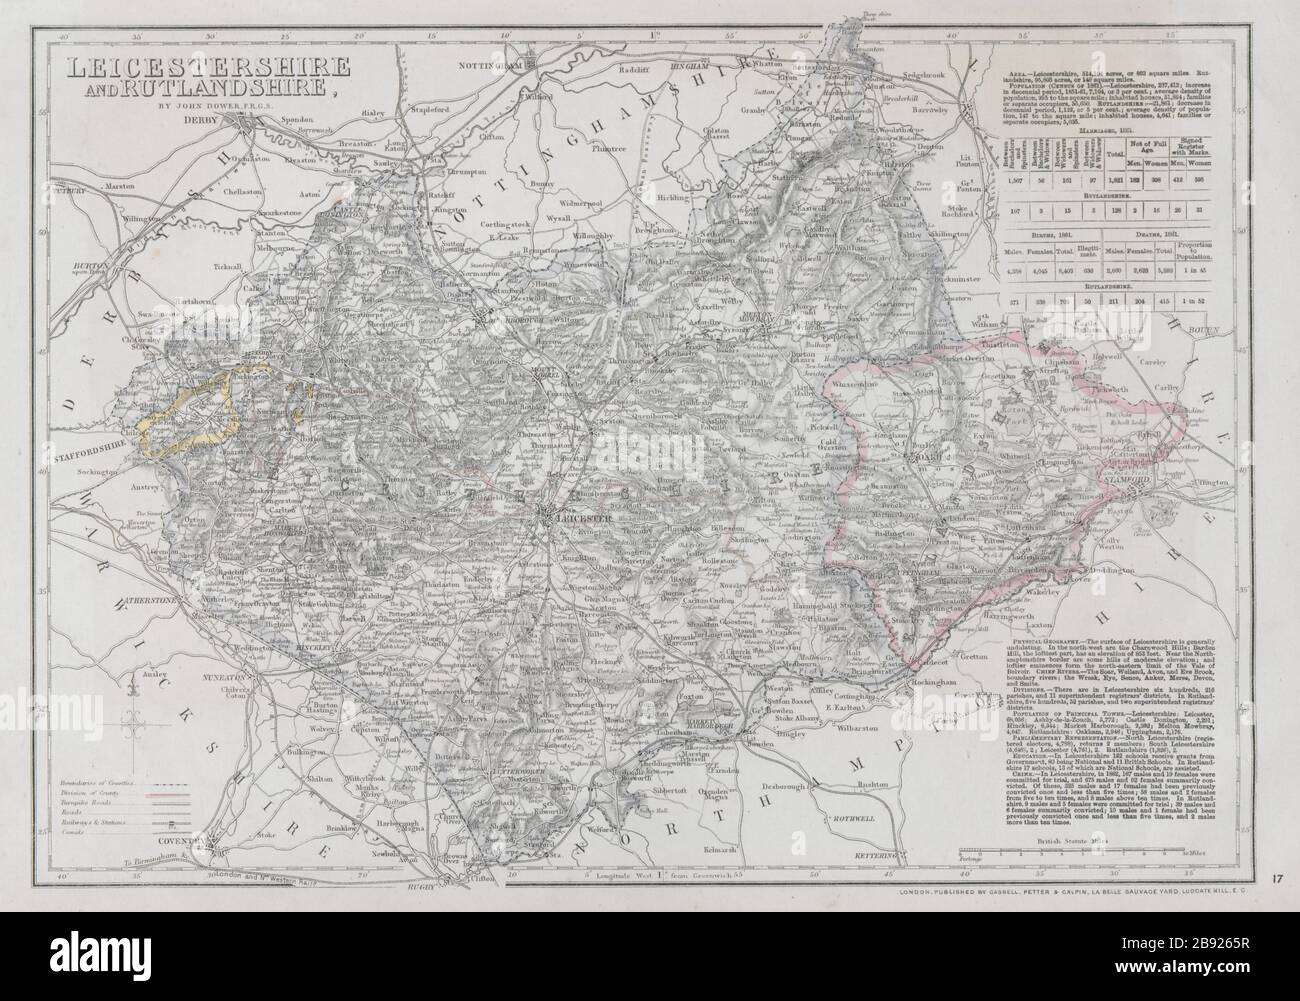 EAST MIDLANDS. Leicestershire & Rutlandshire. Railways Enclaves. DOWER 1868 map Stock Photo